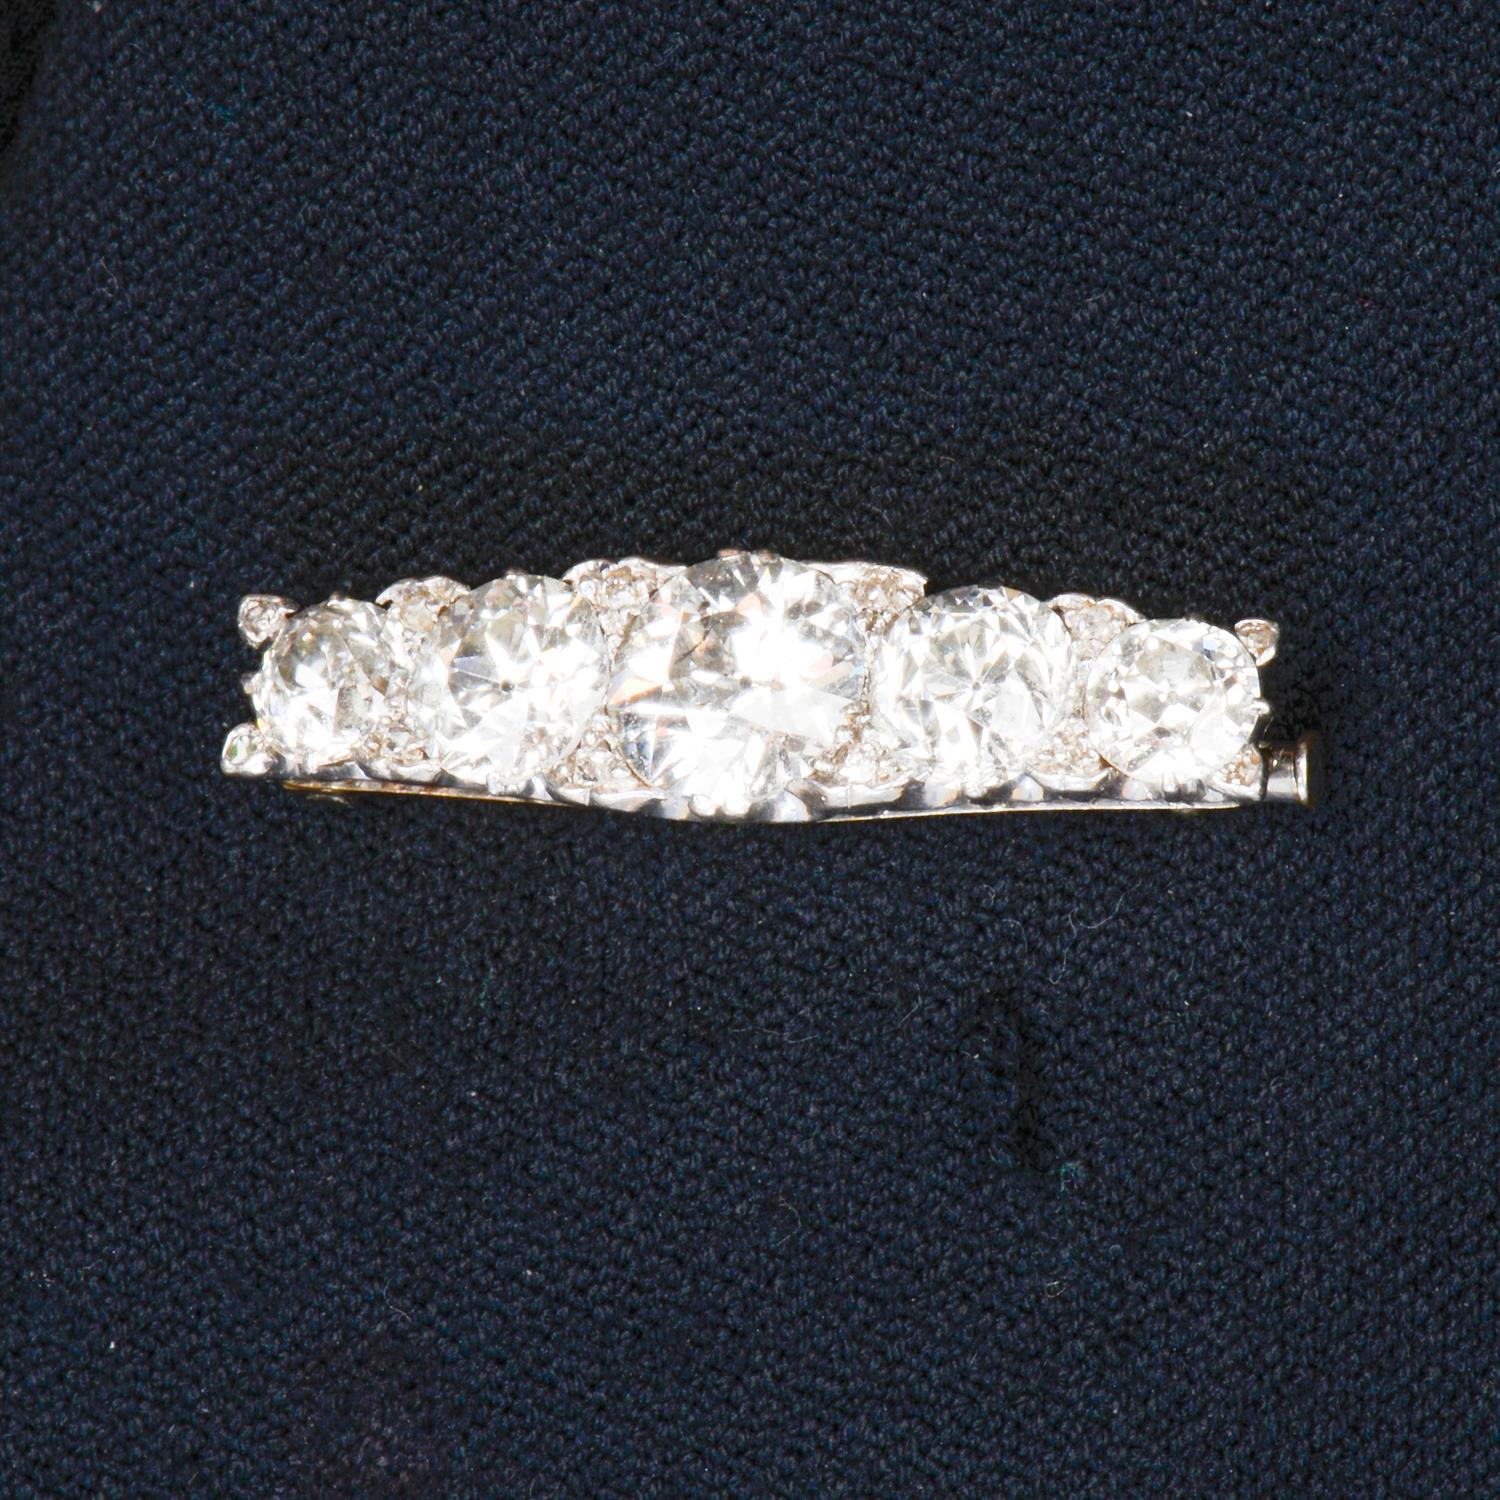 Early 20th century platinum and gold diamond bar brooch